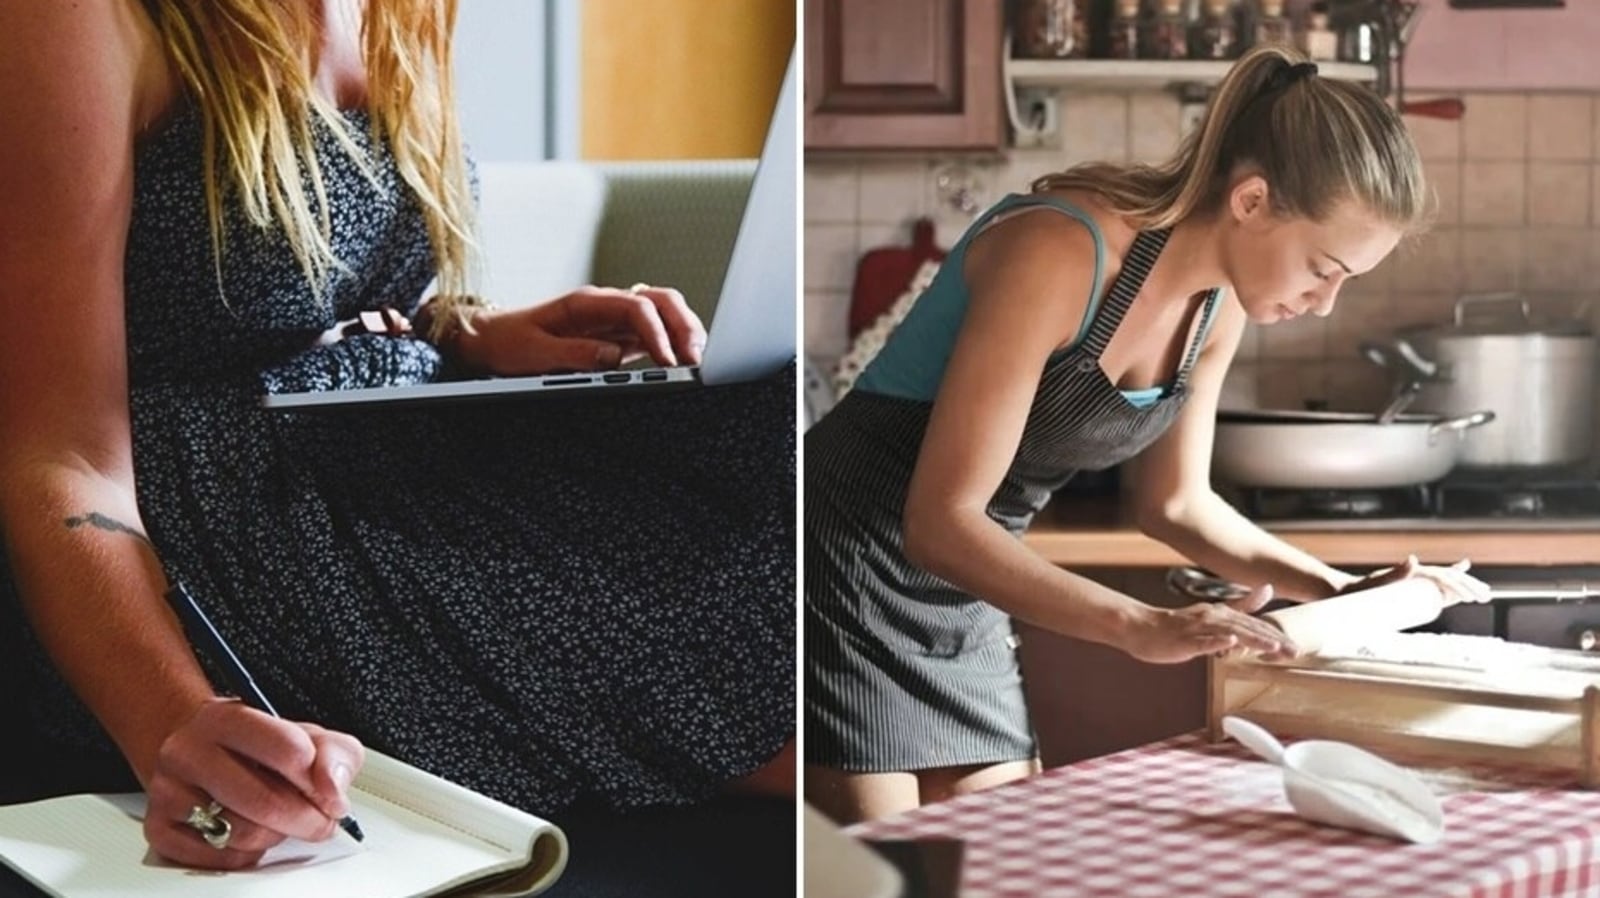 Working woman vs housewife; is one more stressed than the other? Experts answer Health image pic